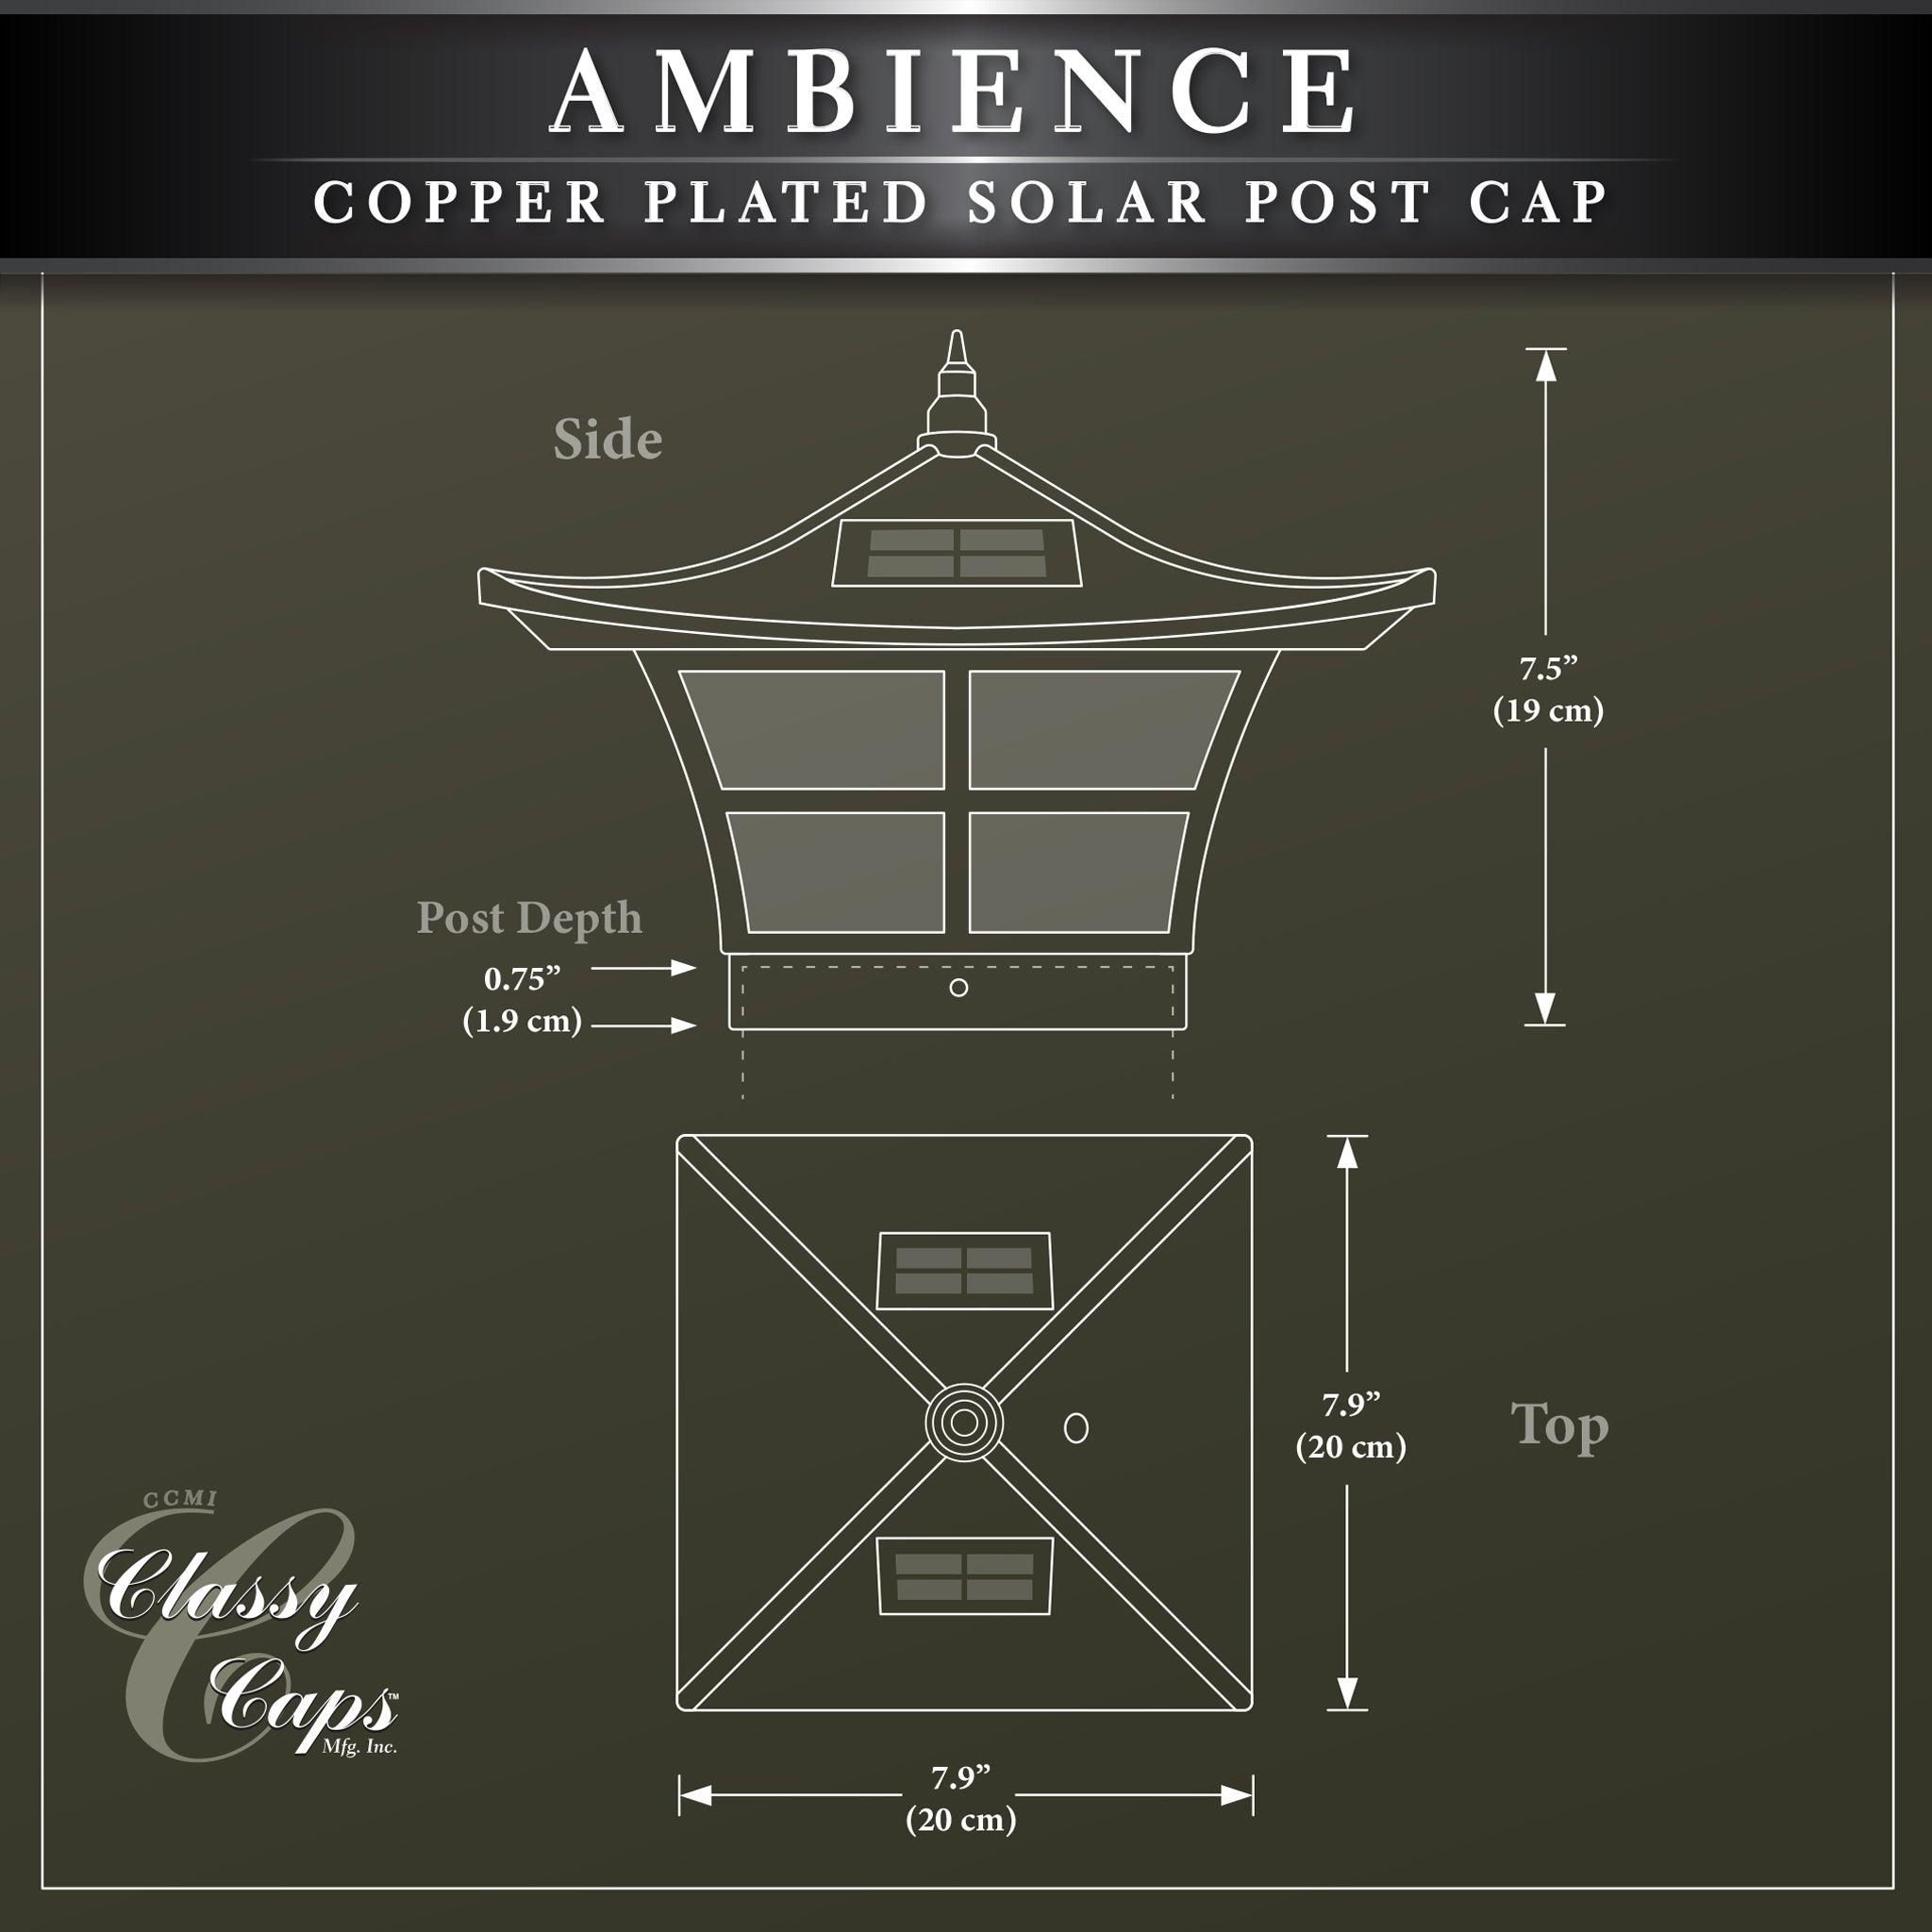 Ambience Solar Post Cap - Copper Electroplated - Classy Caps Mfg. Inc.